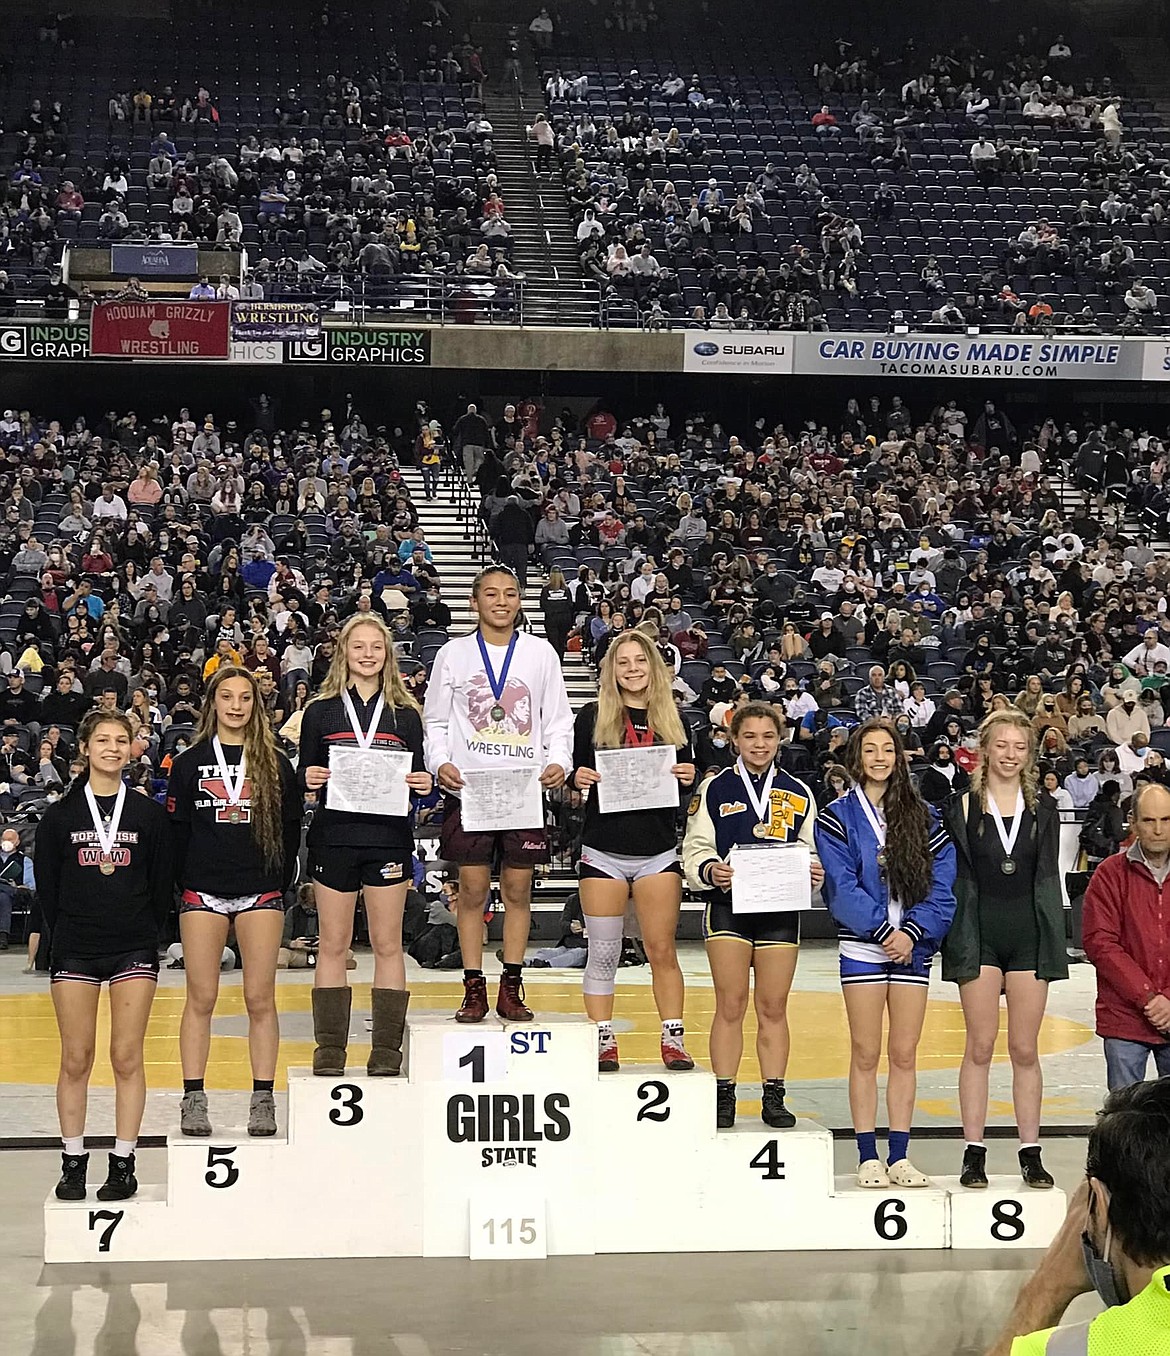 Moses Lake senior Ashley Naranjo poses with other wrestlers at the WIAA Mat Classic after finishing first in the 115 weight class.